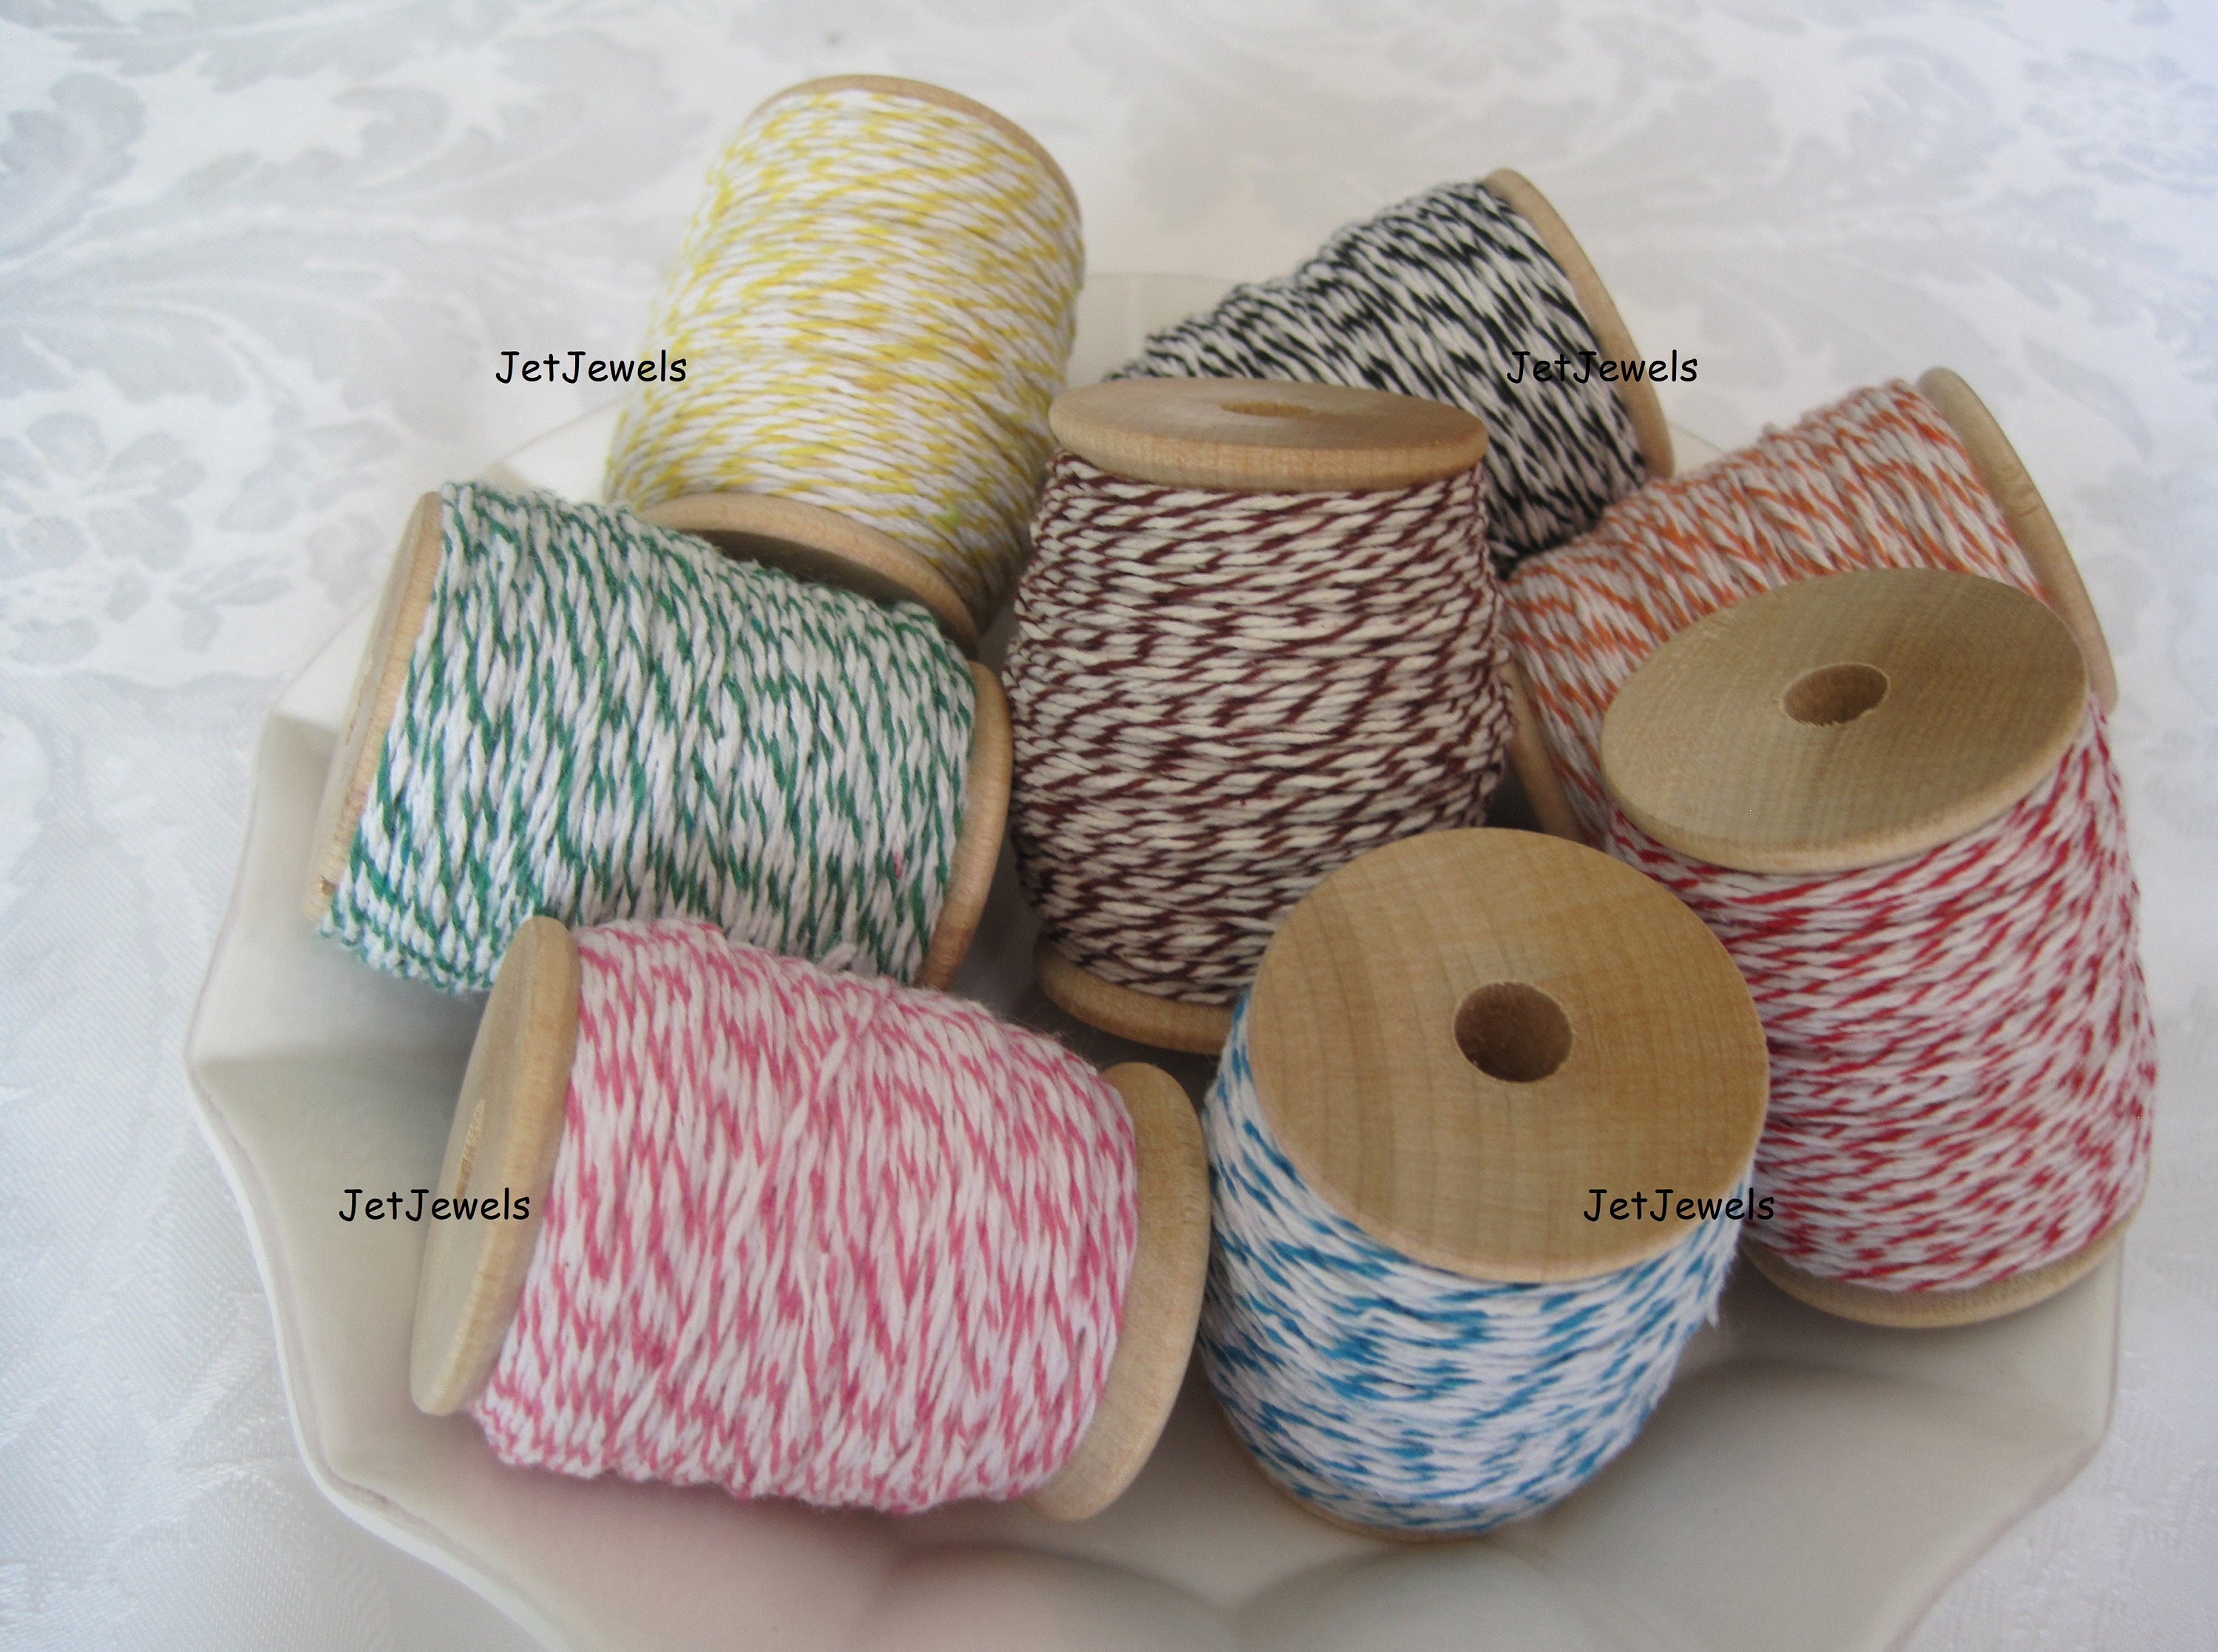 Bakers Stock Cherry Red and White Baker's Twine, 240 yds